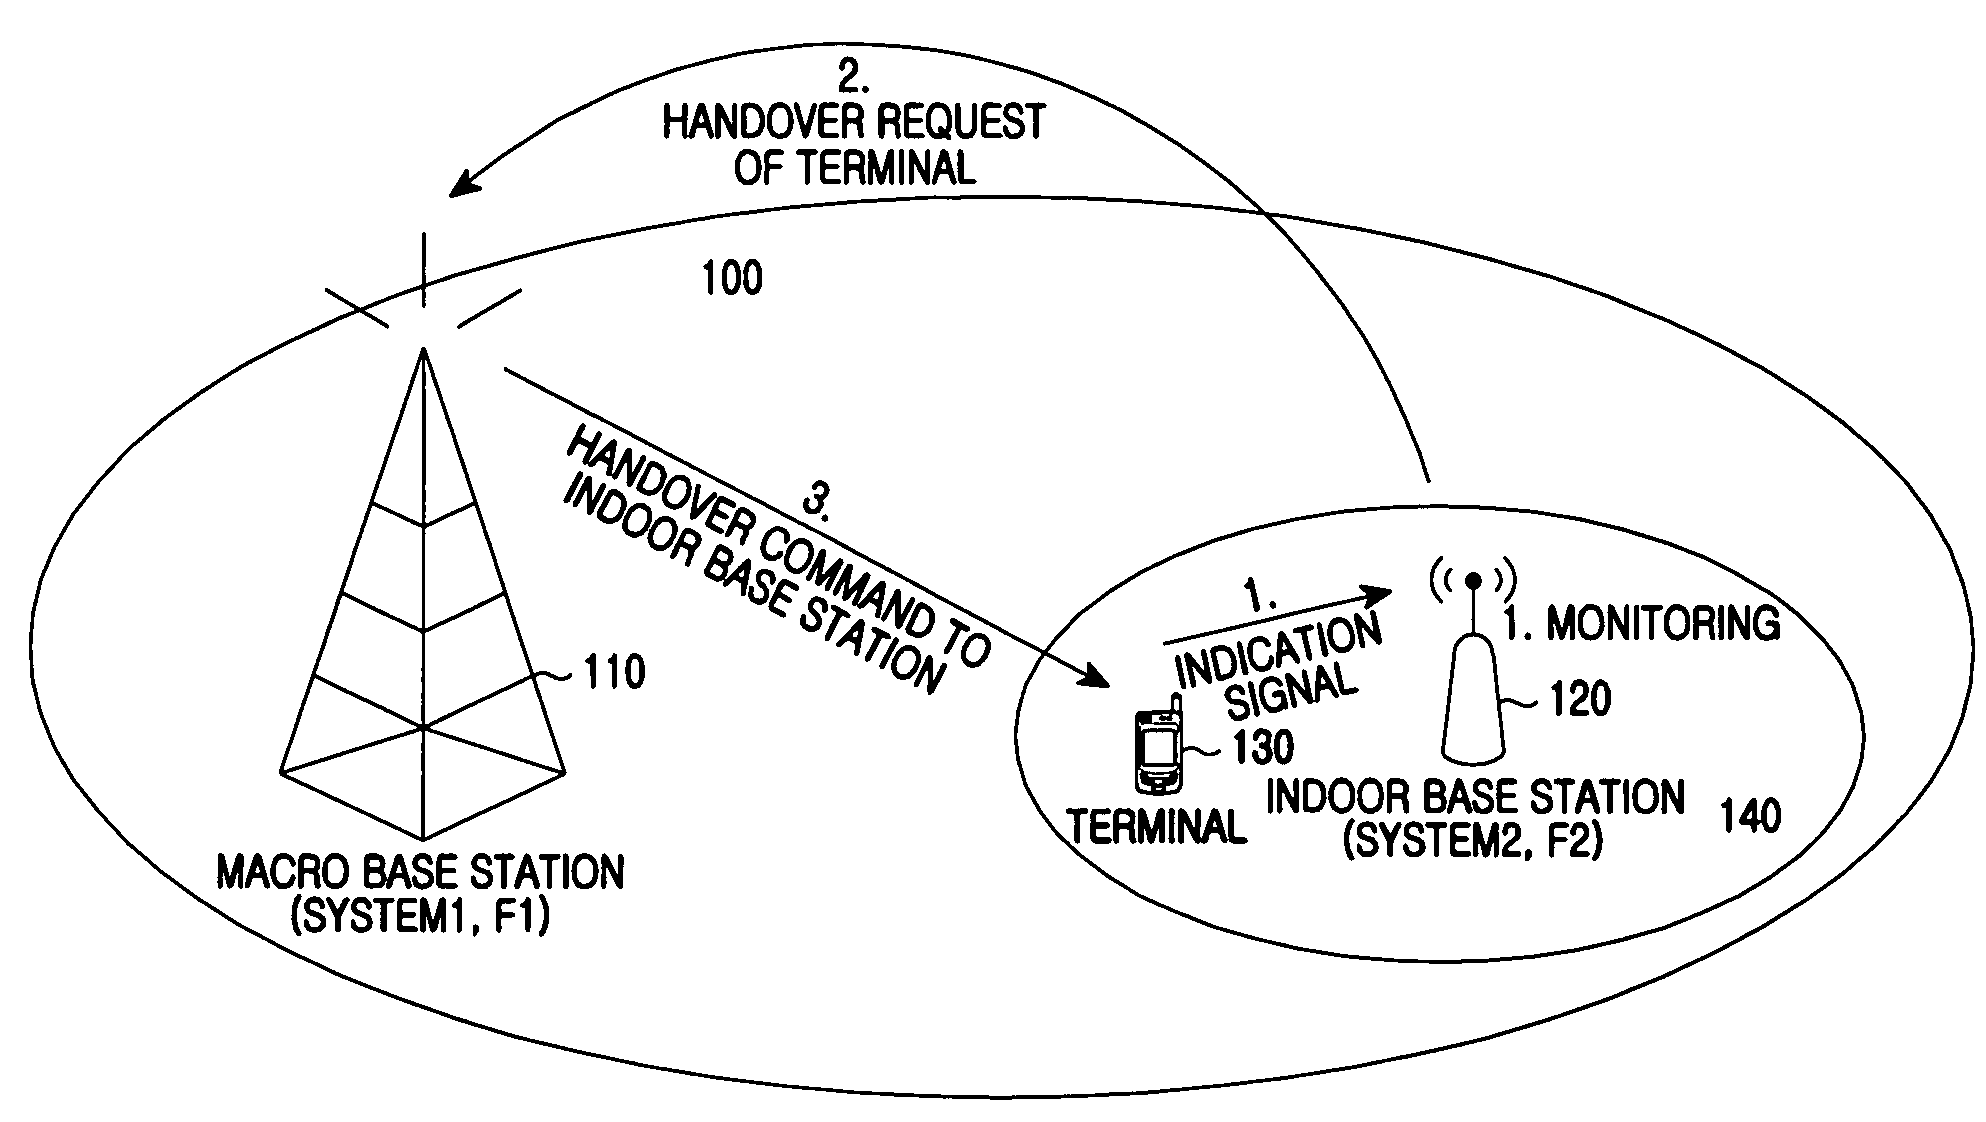 Apparatus and method for terminal handover between systems using different frequency allocations